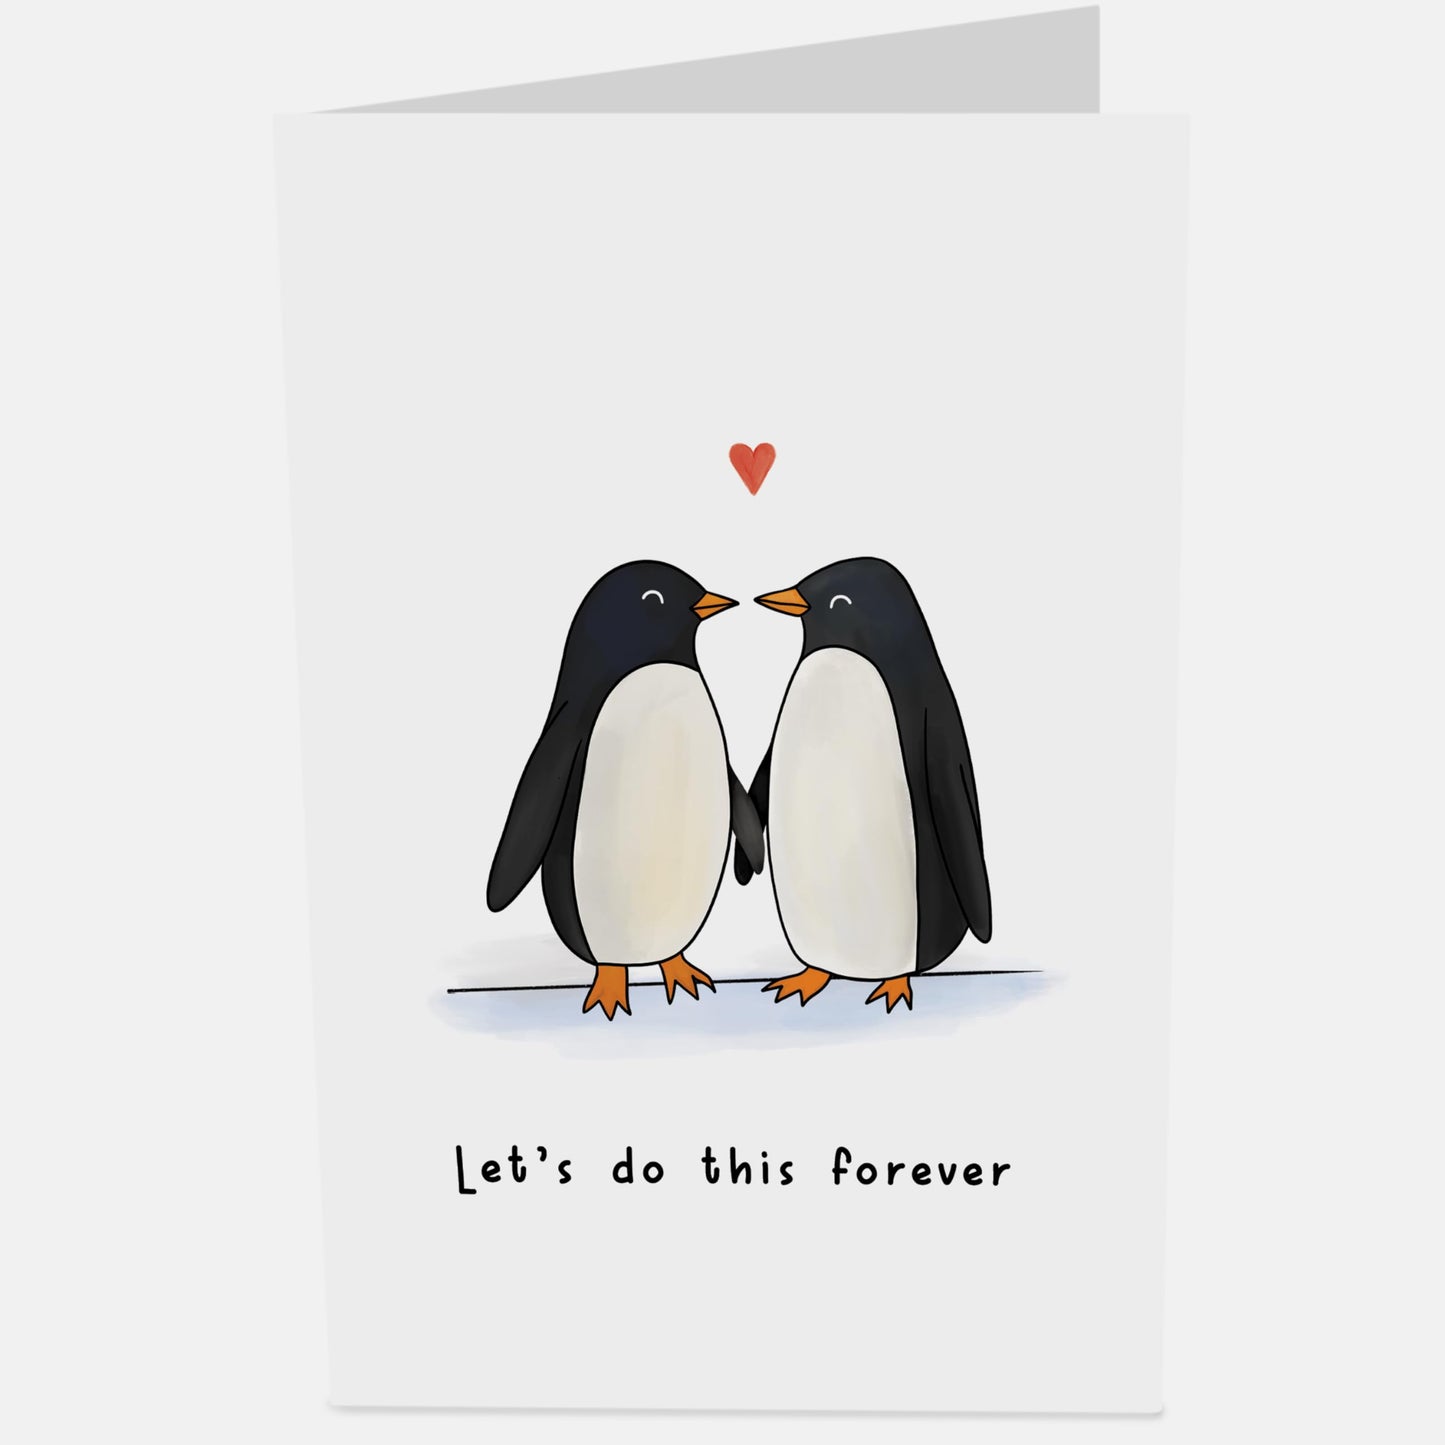 Cute Pop Up Card - Let's Do This Forever - For Men Women Him Her